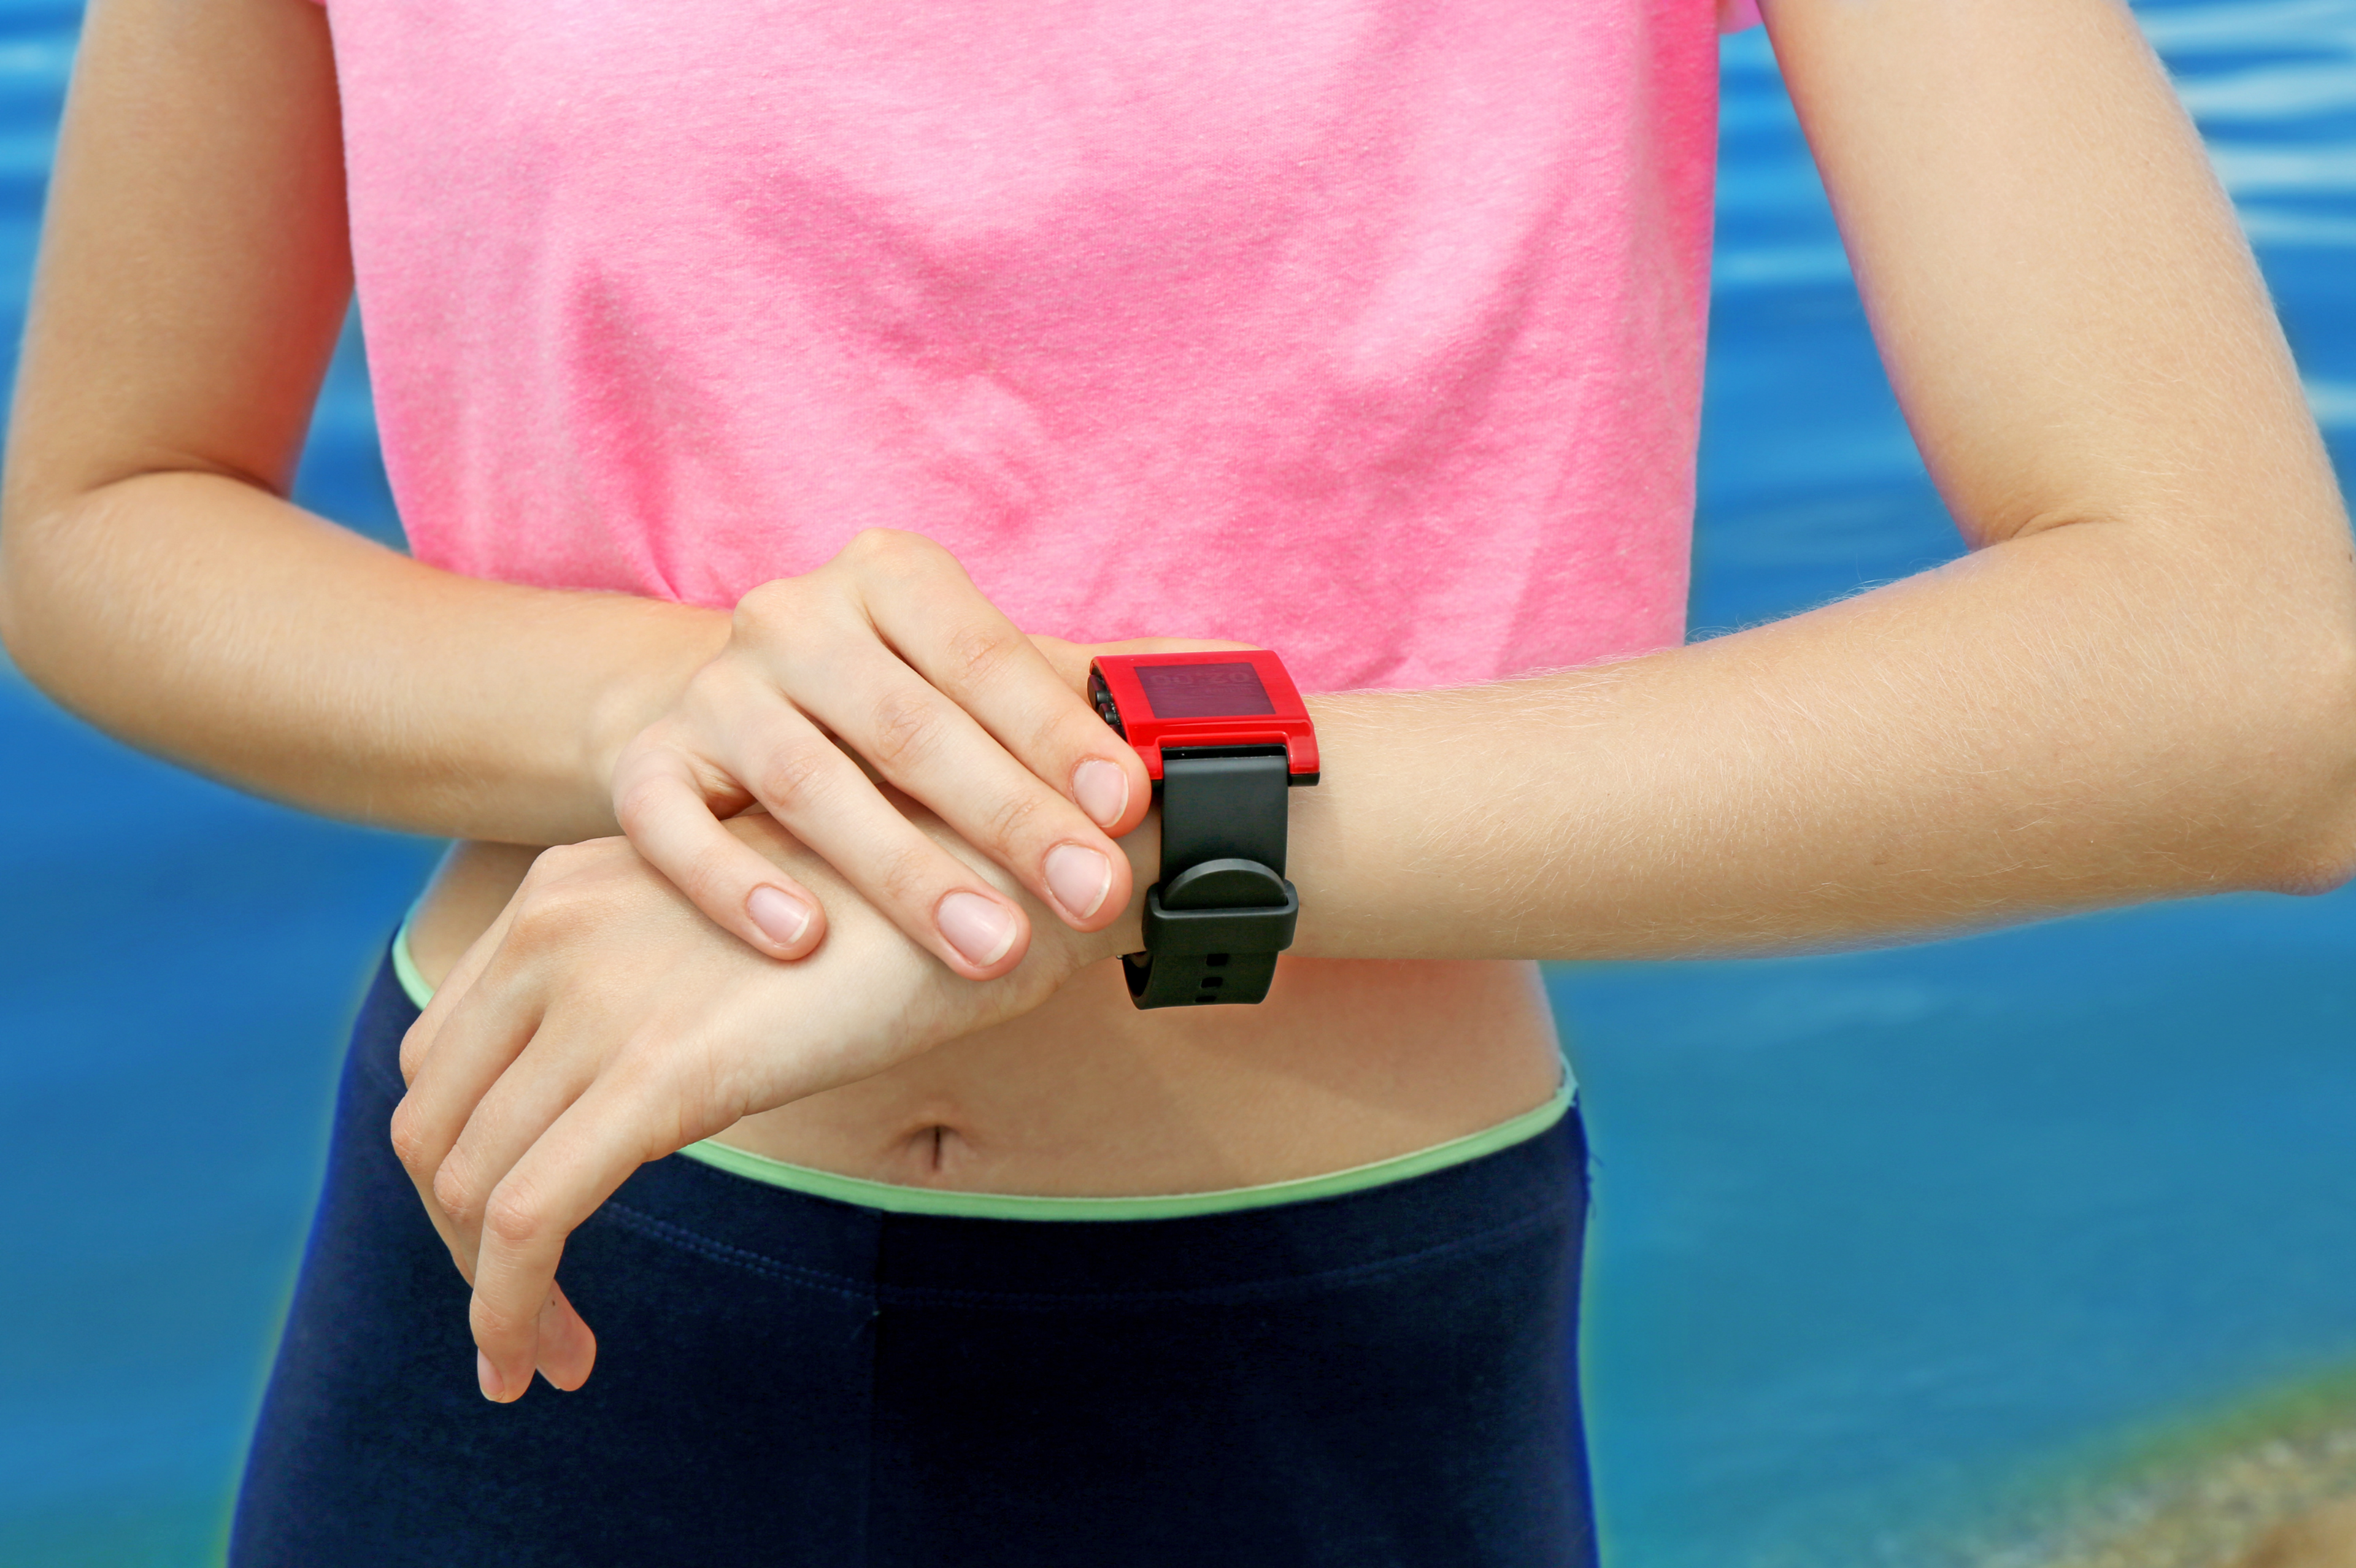 Most running watches provide the acute-on-chronic training load ratio.